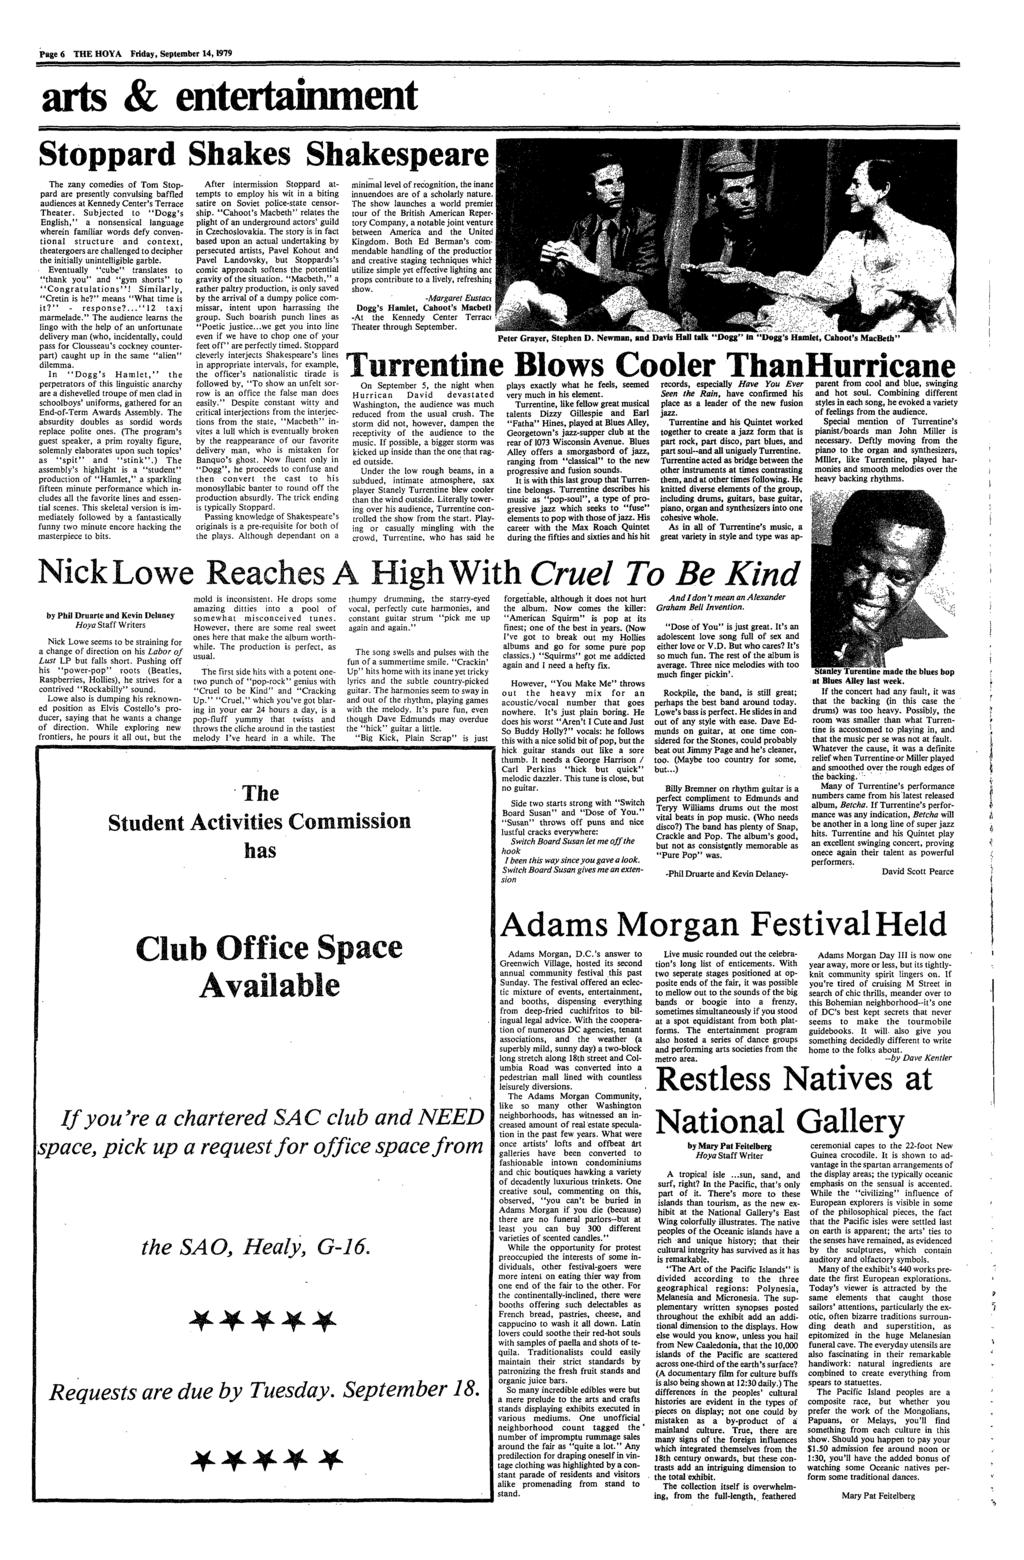 Page 6 THE HOYA Friday, Sepember 14, 1979 ars & enerainmen Soppard Shakes Shakespeare The zany comedies of Tom Soppard are presenly convulsing baffled audiences a Kennedy Cener's Terrace Theaer.